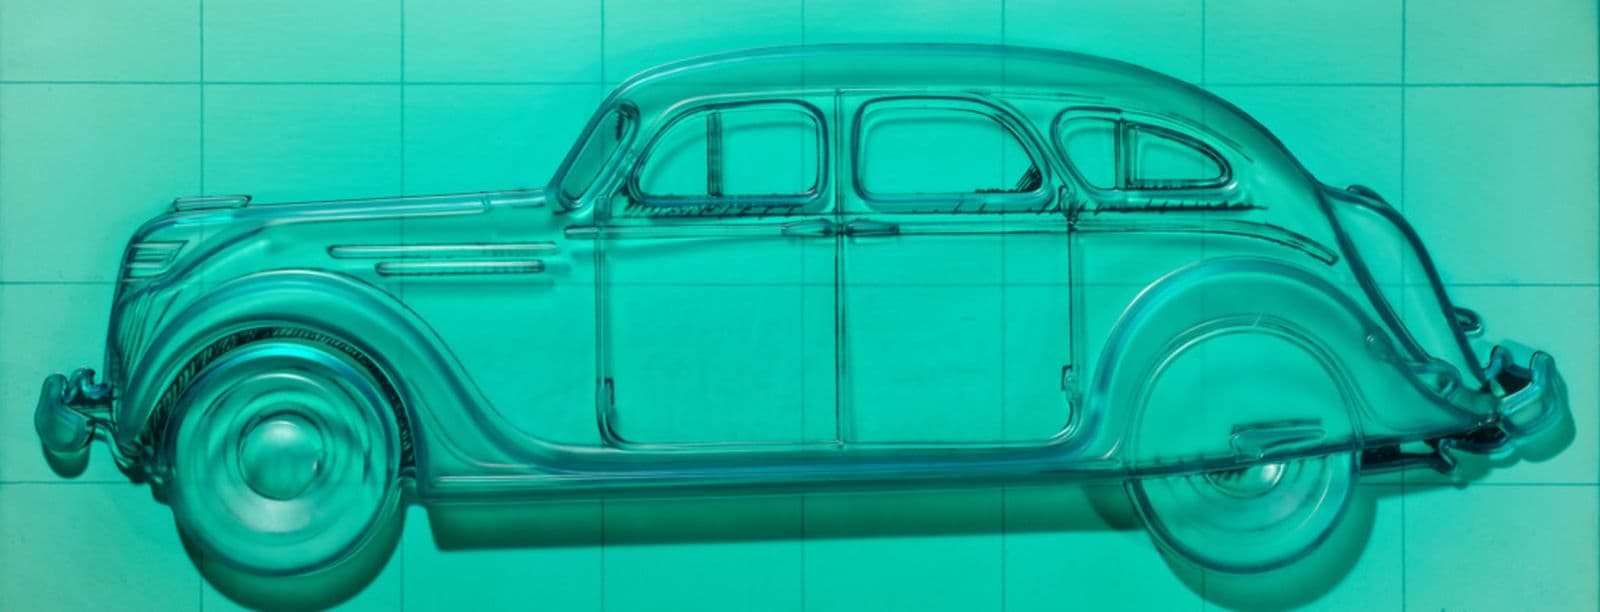 Print of a car with a blue see-through overlay